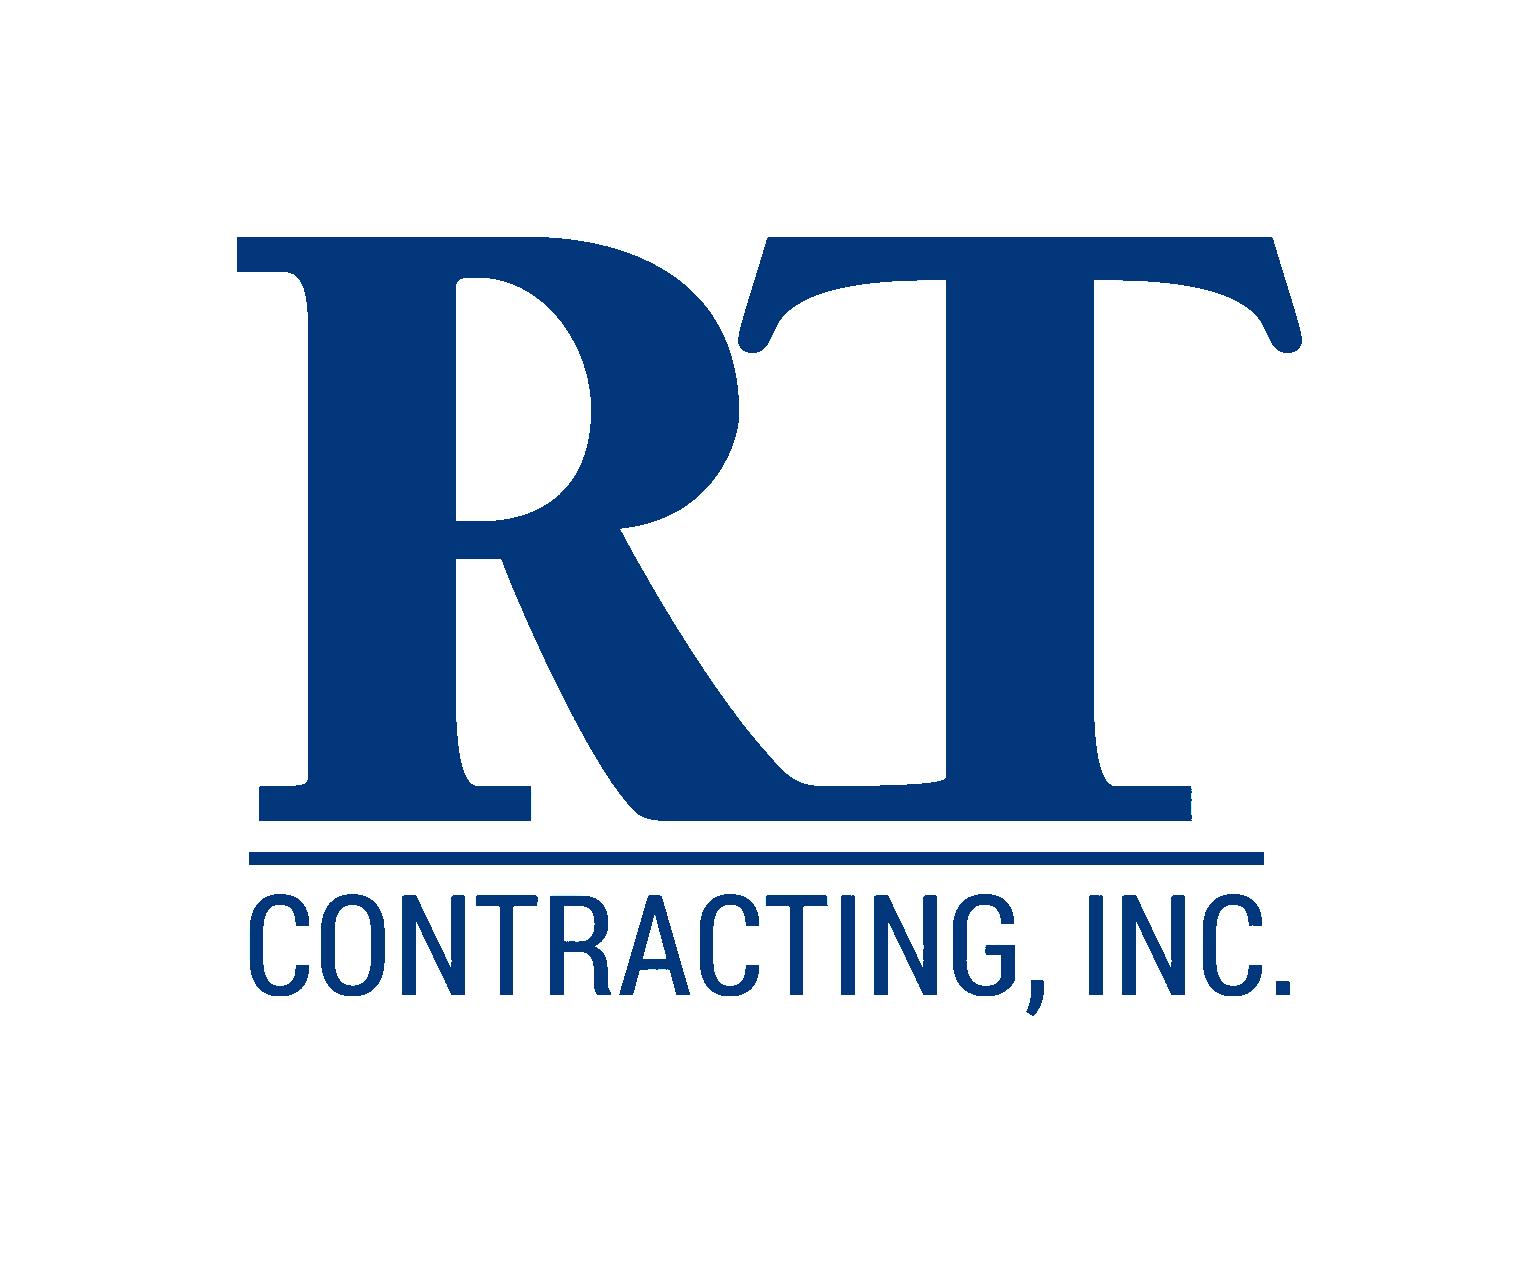 RT Contracting